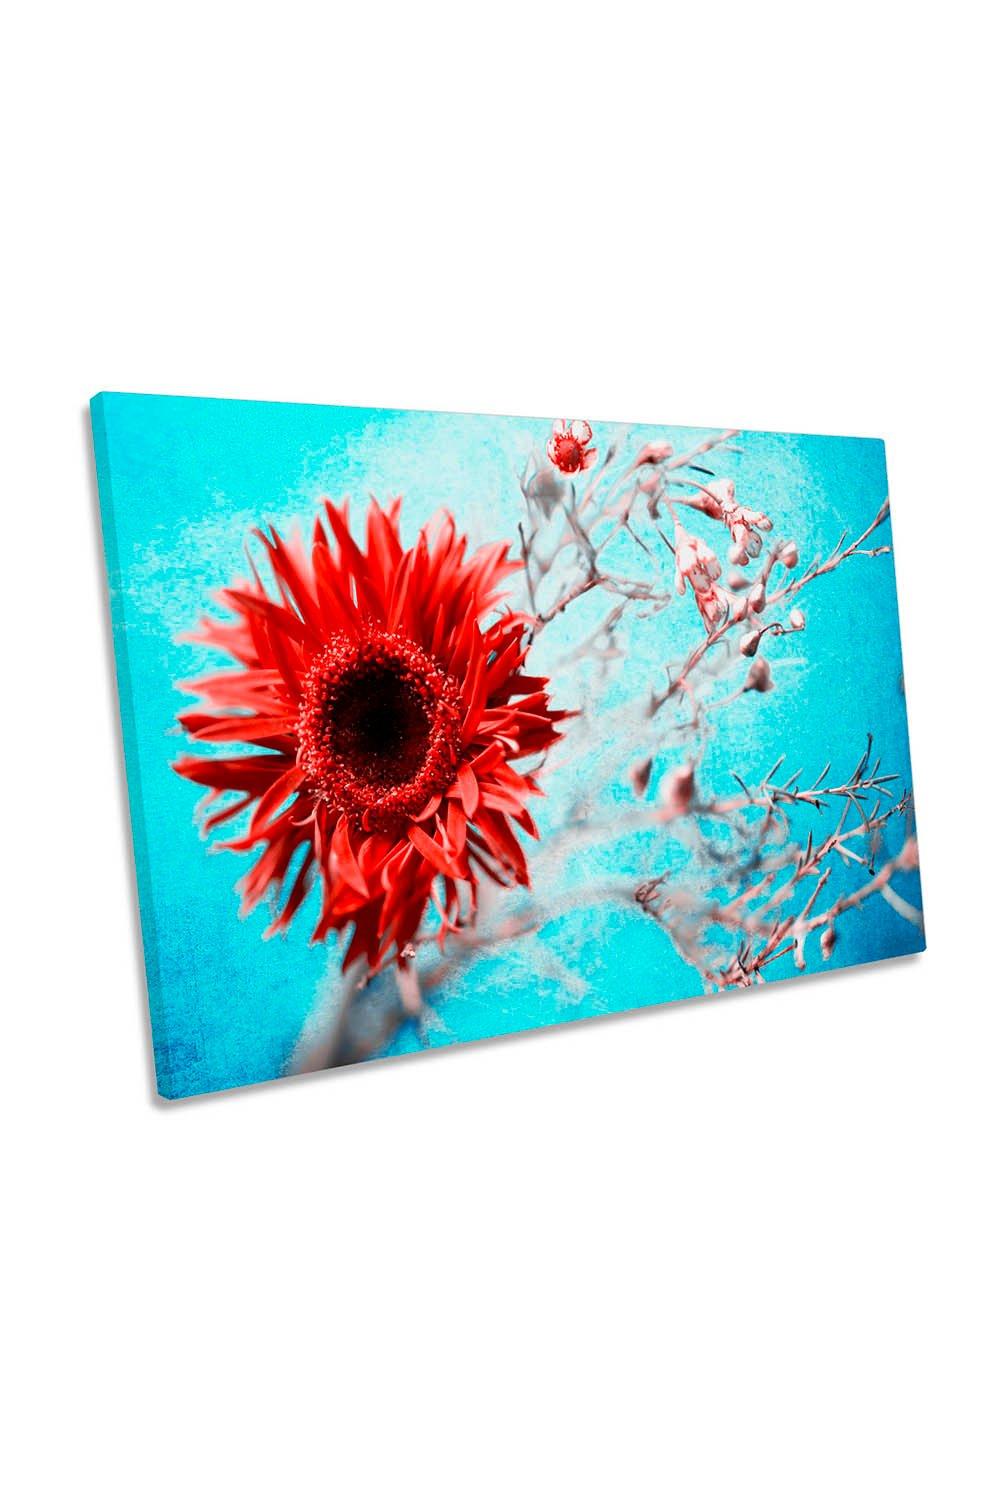 Marigold Red Flower Floral Blue Canvas Wall Art Picture Print